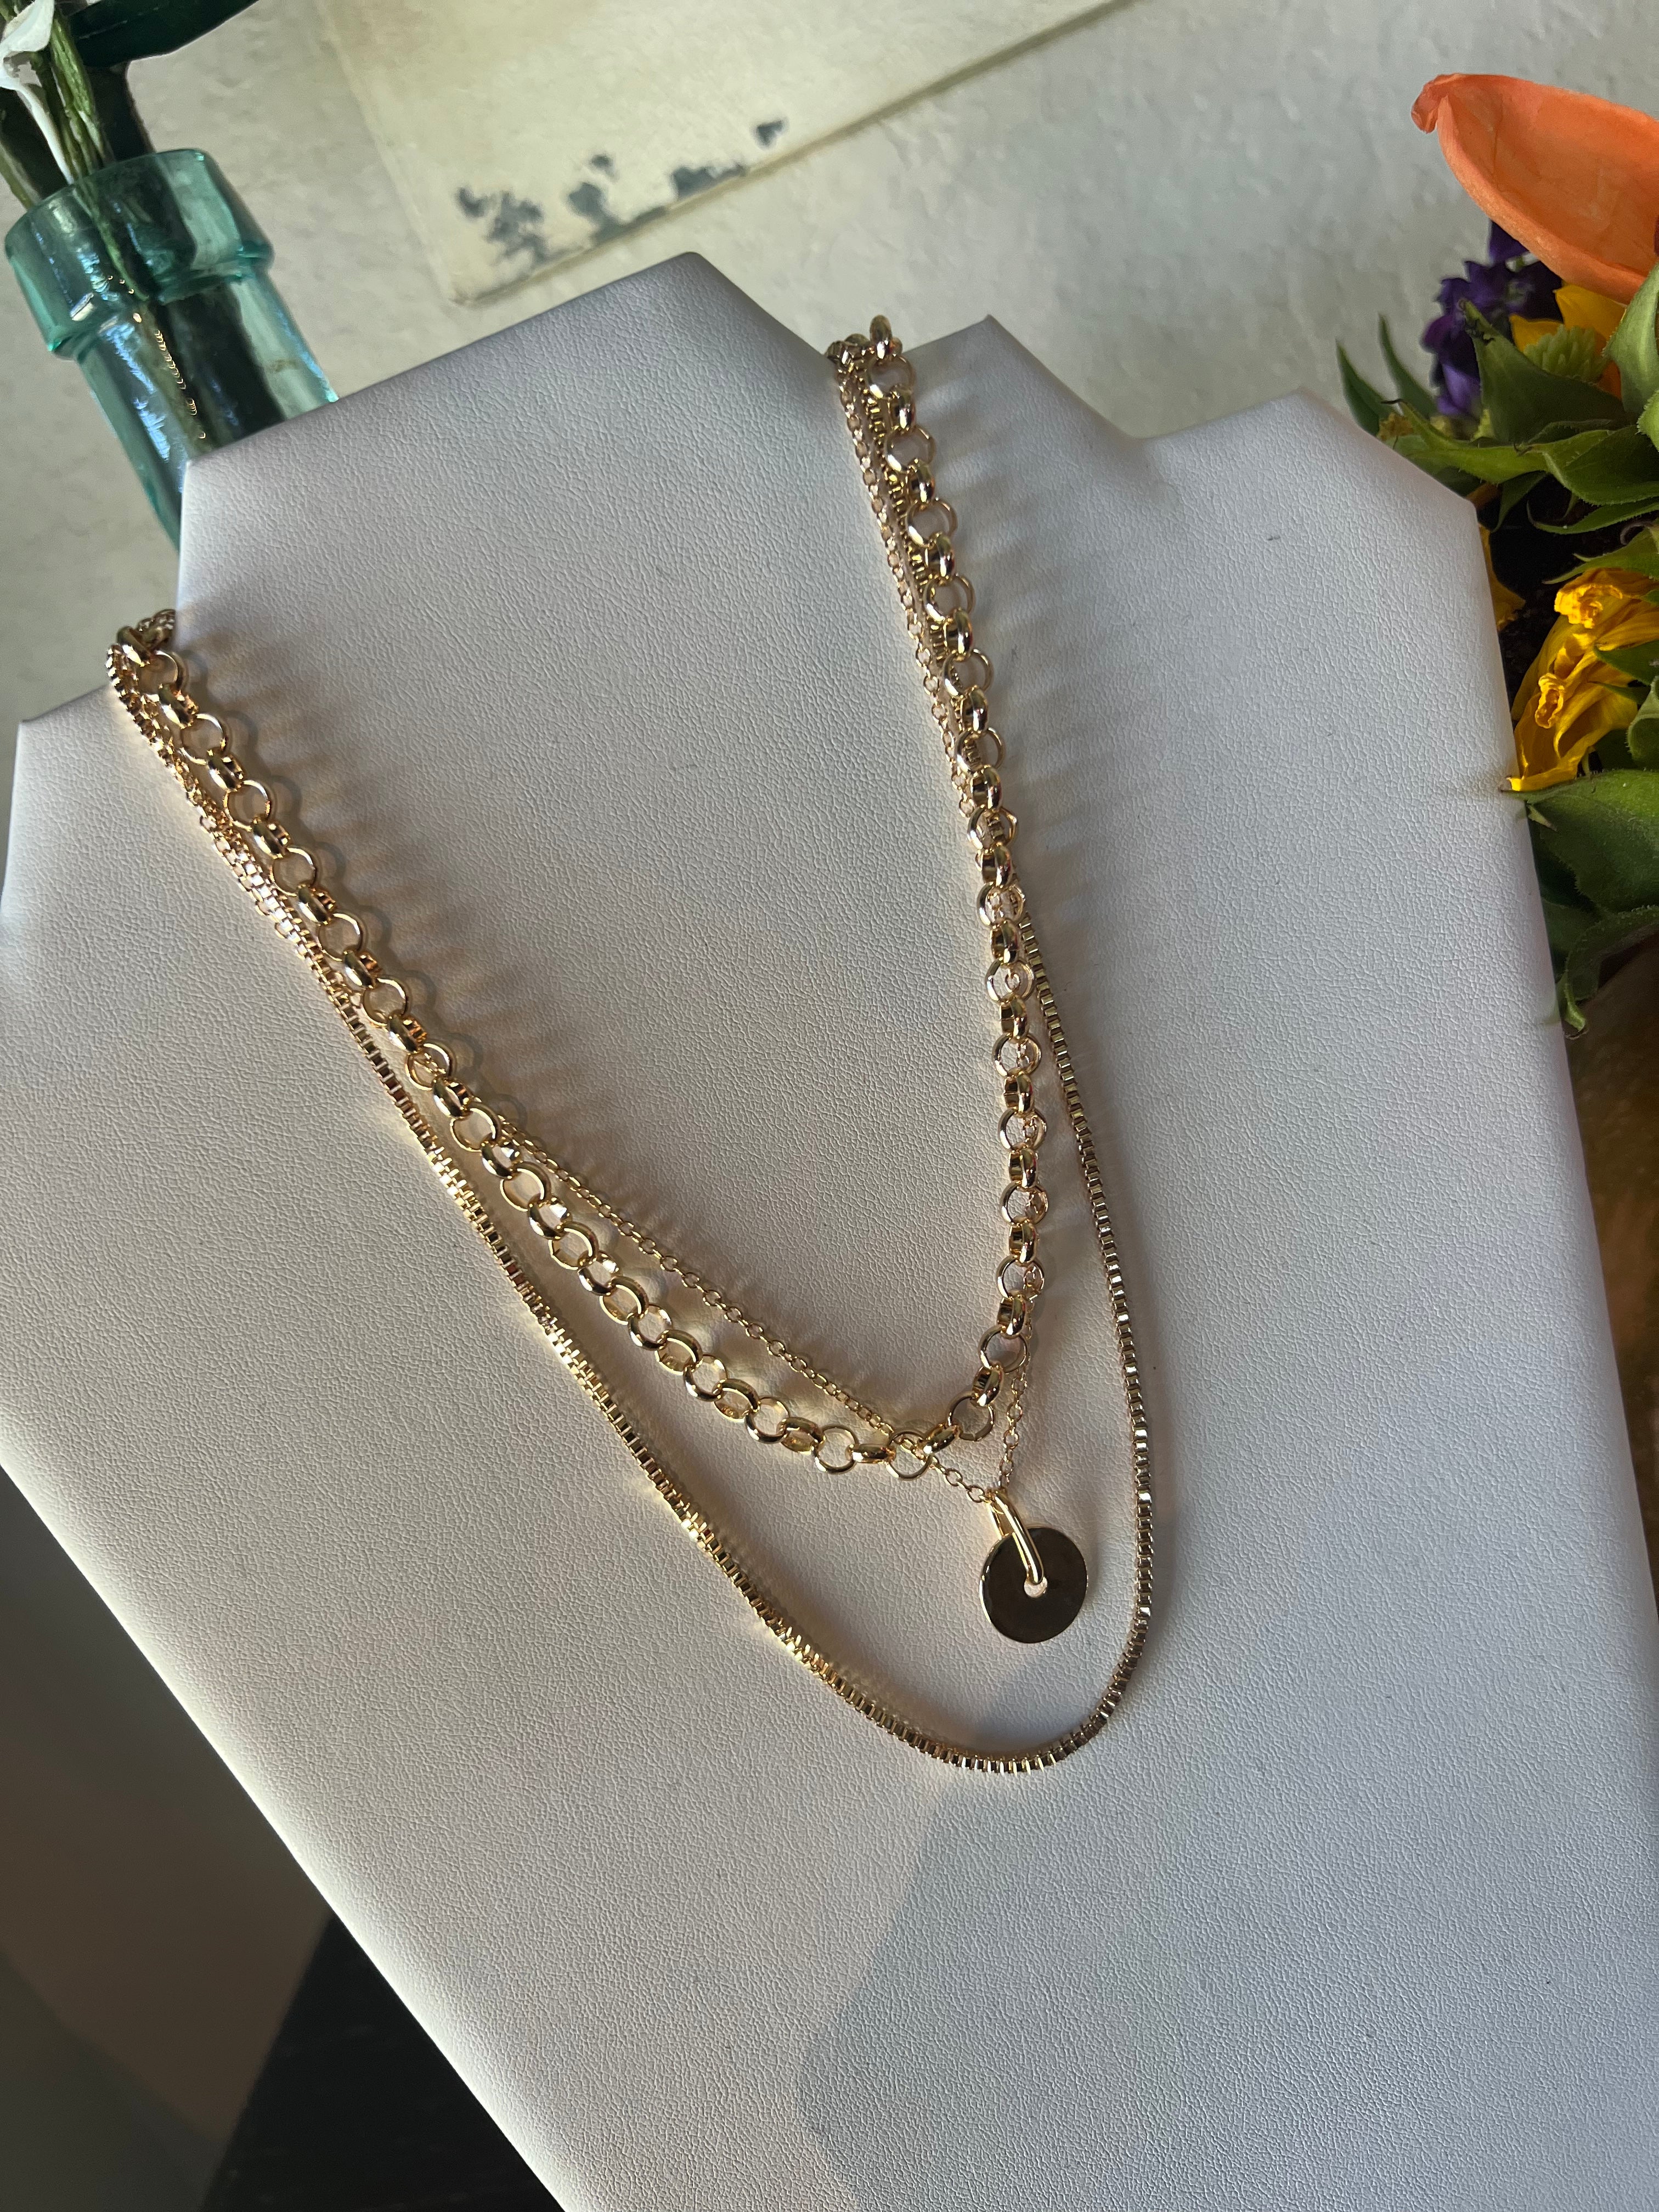 3 Piece Chain with Charm Layered Necklace (Silver and Gold!)